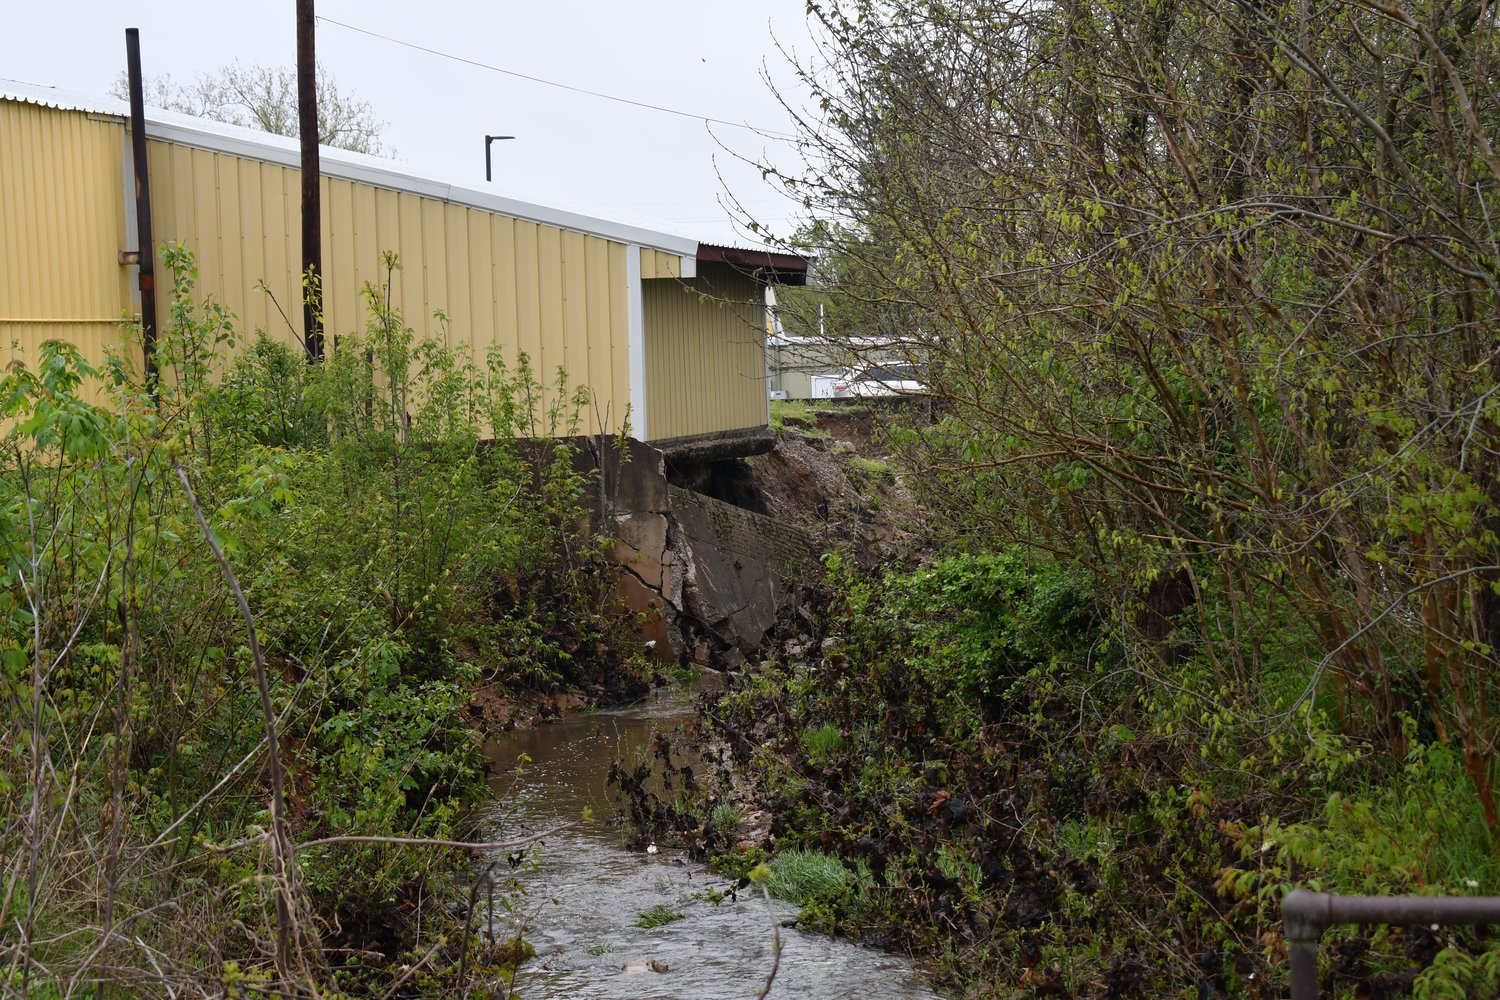 Sho-Me Muffler and Brake on West Broadway Street in Bolivar lost a large portion of the retaining wall at the back of their building following heavy rains this week.